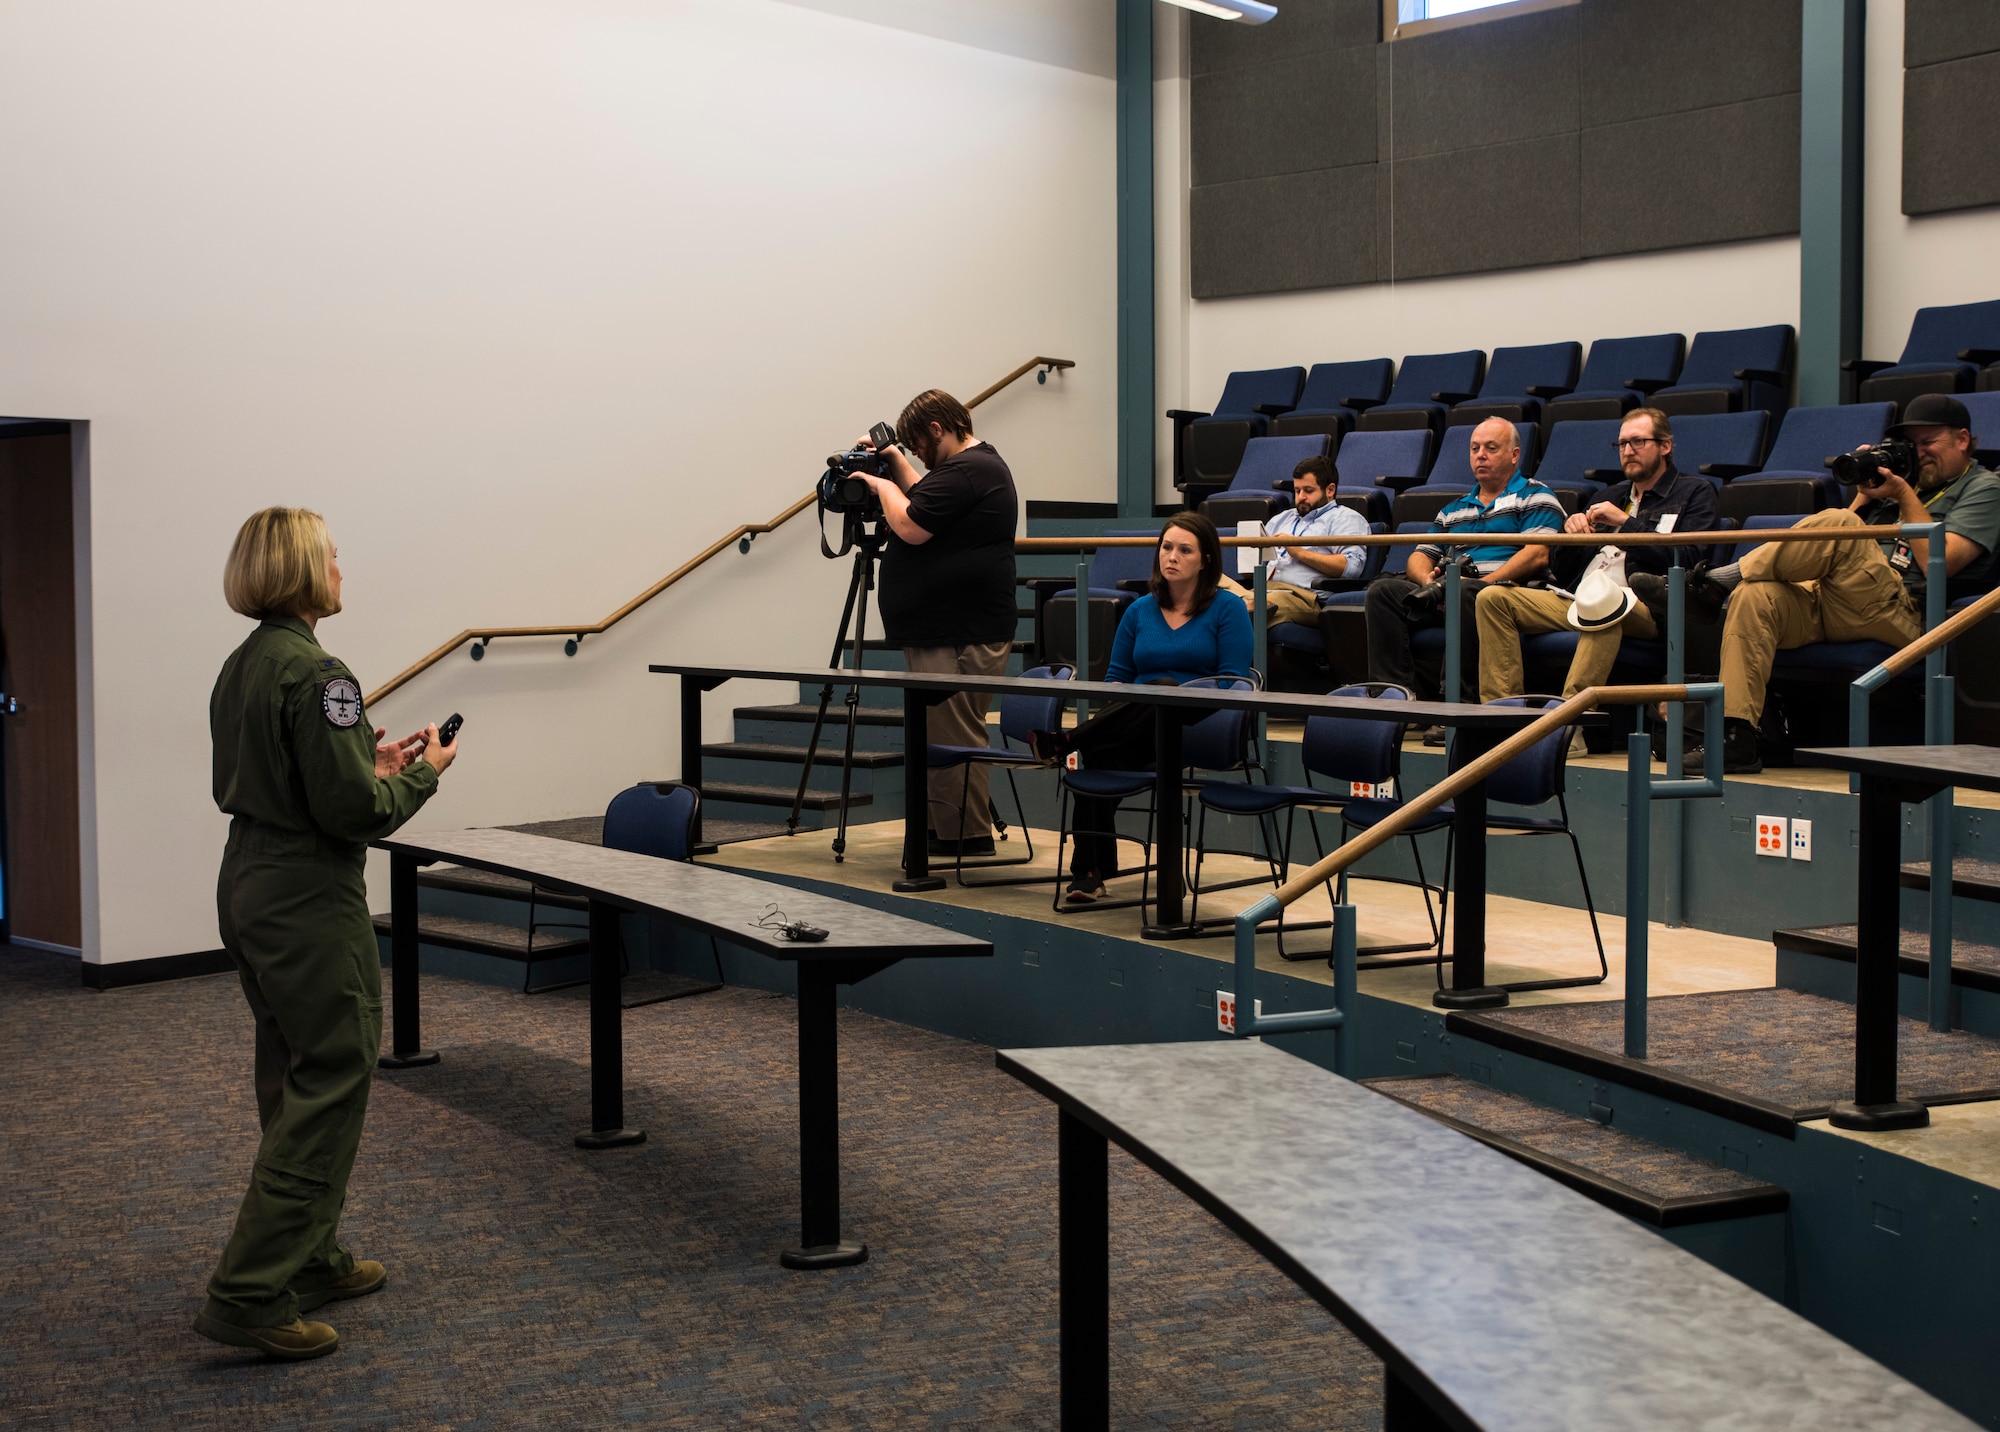 Col. Bobbi Doorenbos, 188th Wing commander, announces the activation of the wing’s remotely piloted aircraft, intelligence analysis and targeting missions to members of the local media, Sept. 29, 2016, at Ebbing Air National Guard Base, Fort Smith, Ark. In addition to the wing being operational, Doorenbos emphasized that it is also unique with its one-of-a-kind combined operations and first-of-its-kind space focused targeting mission and is now looking to hire over 100 new Airmen across the organization. (U.S. Air National Guard photo by Senior Airman Cody Martin)